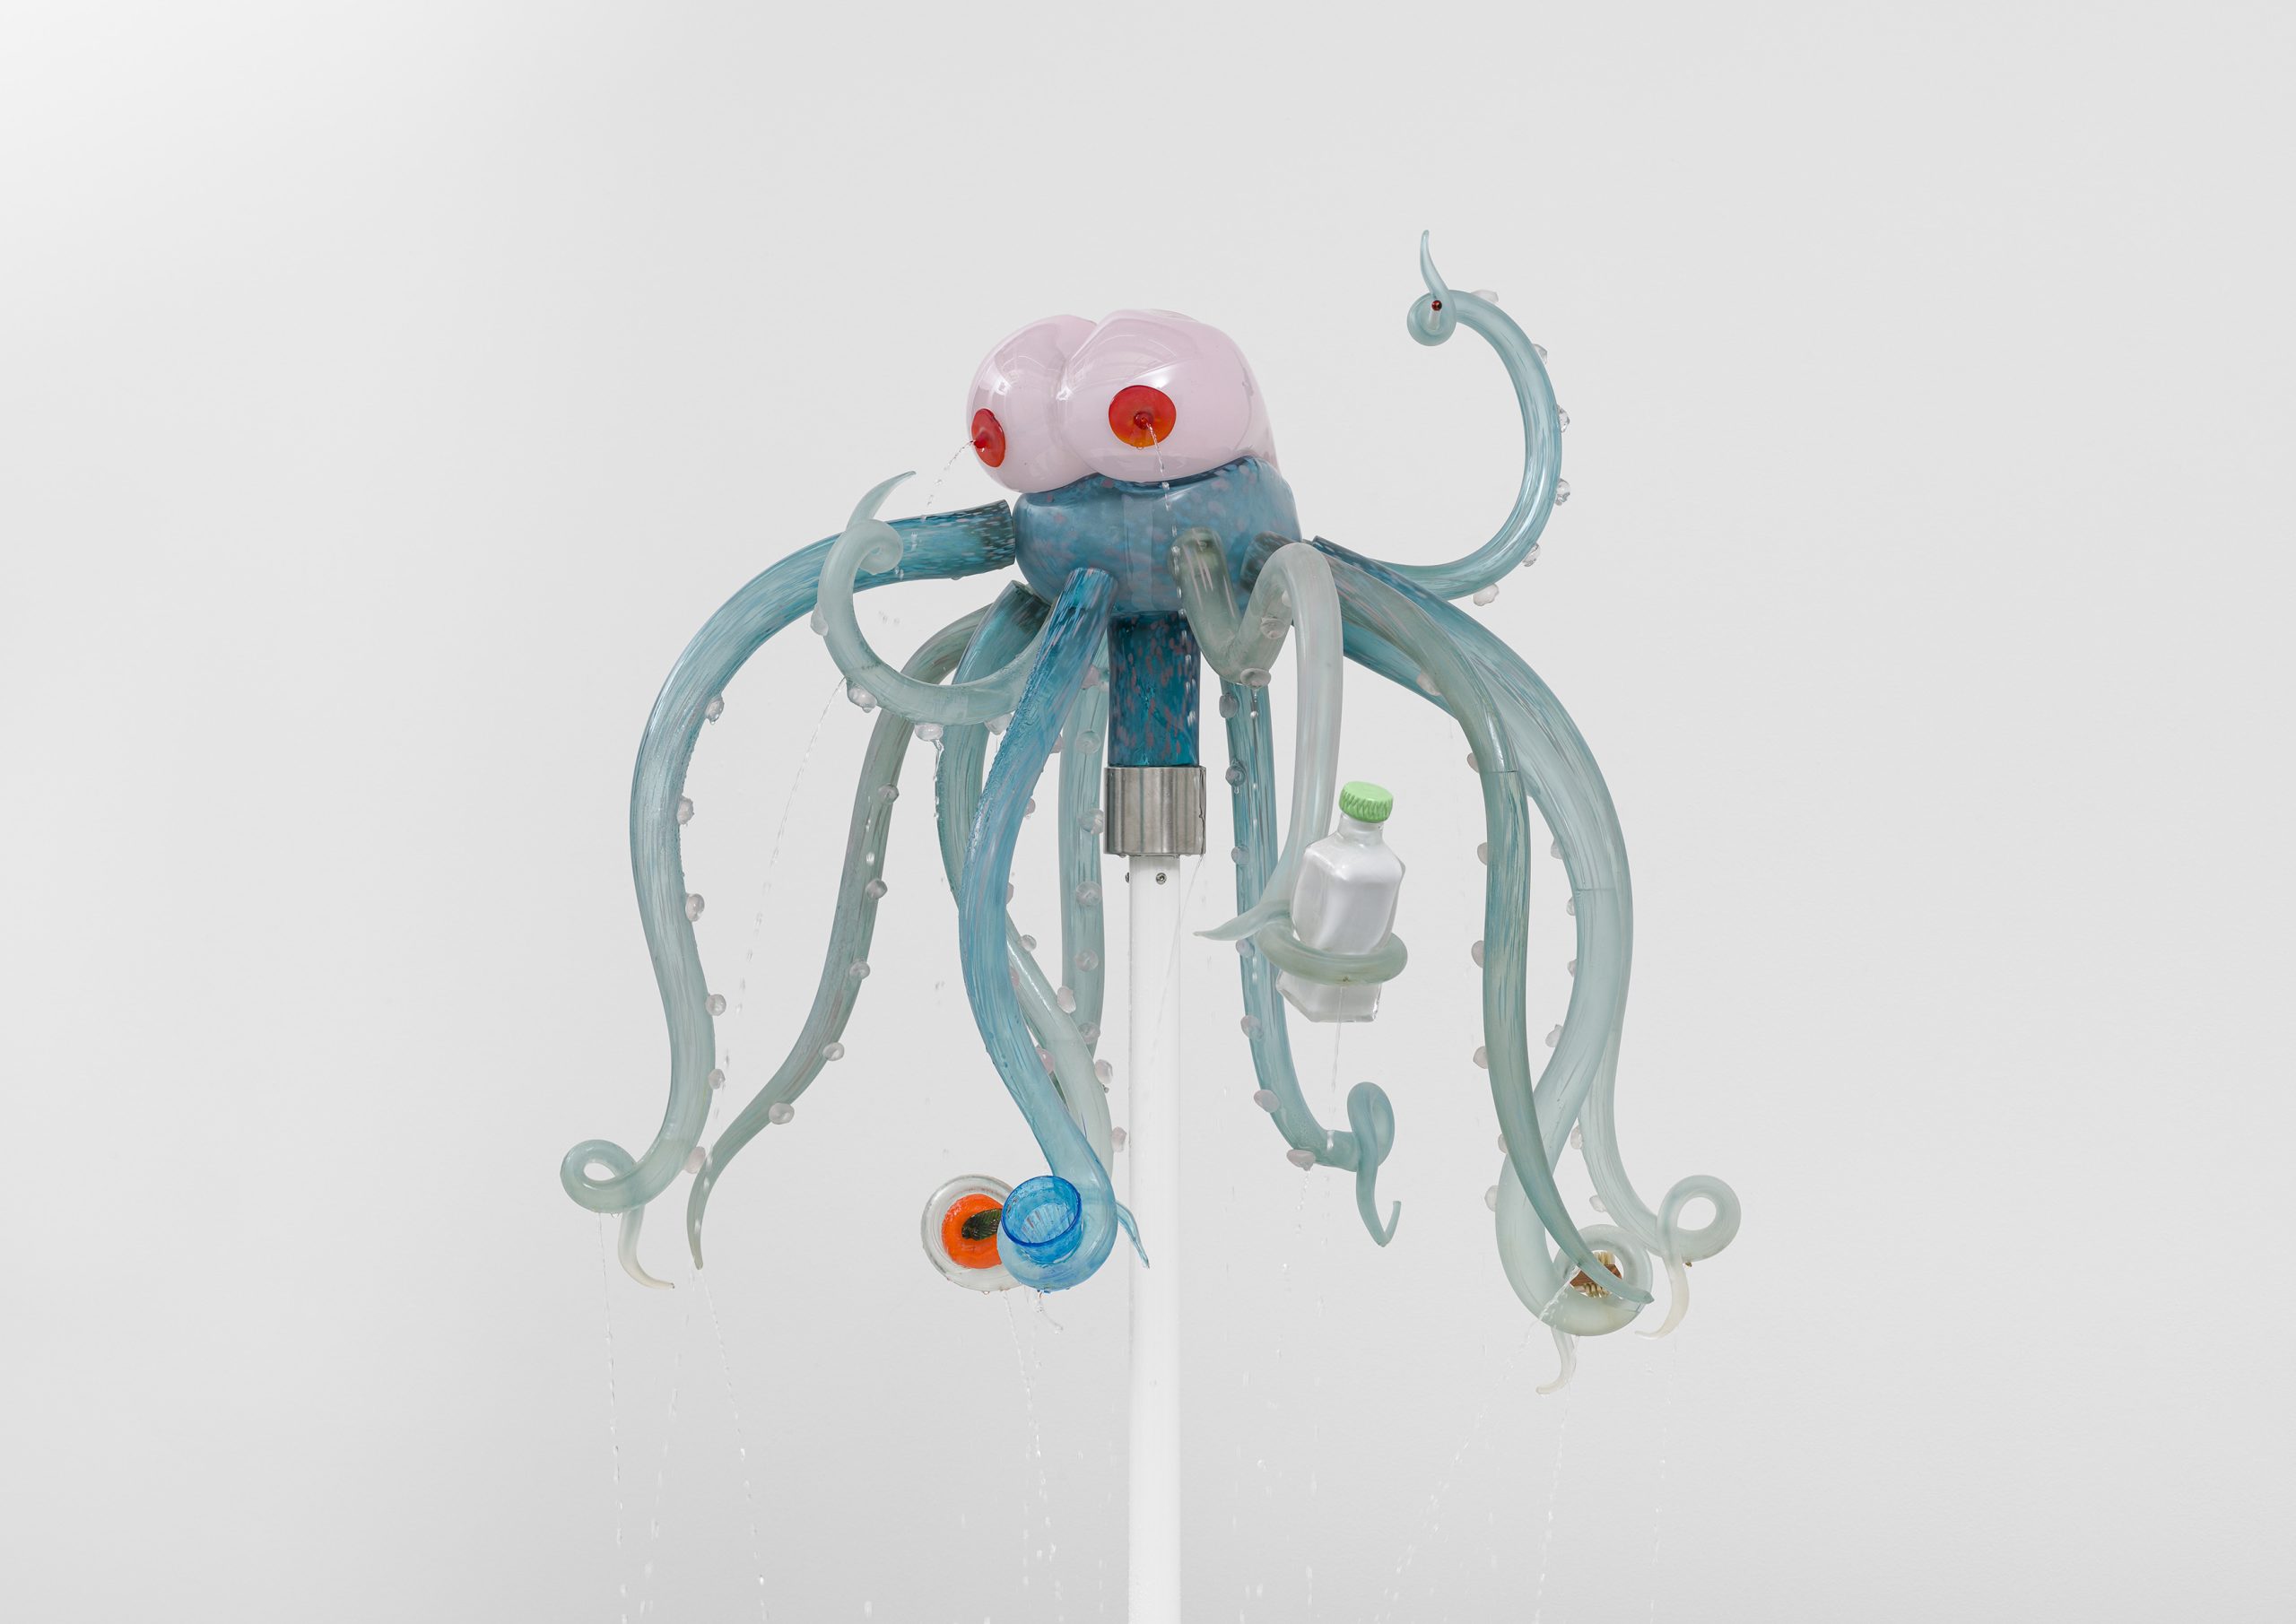 A Venetian glass sculpture depicts an octopus-like creature with breasts for a head. The creature is grasping various items in its tentacles including an orange and a glass.